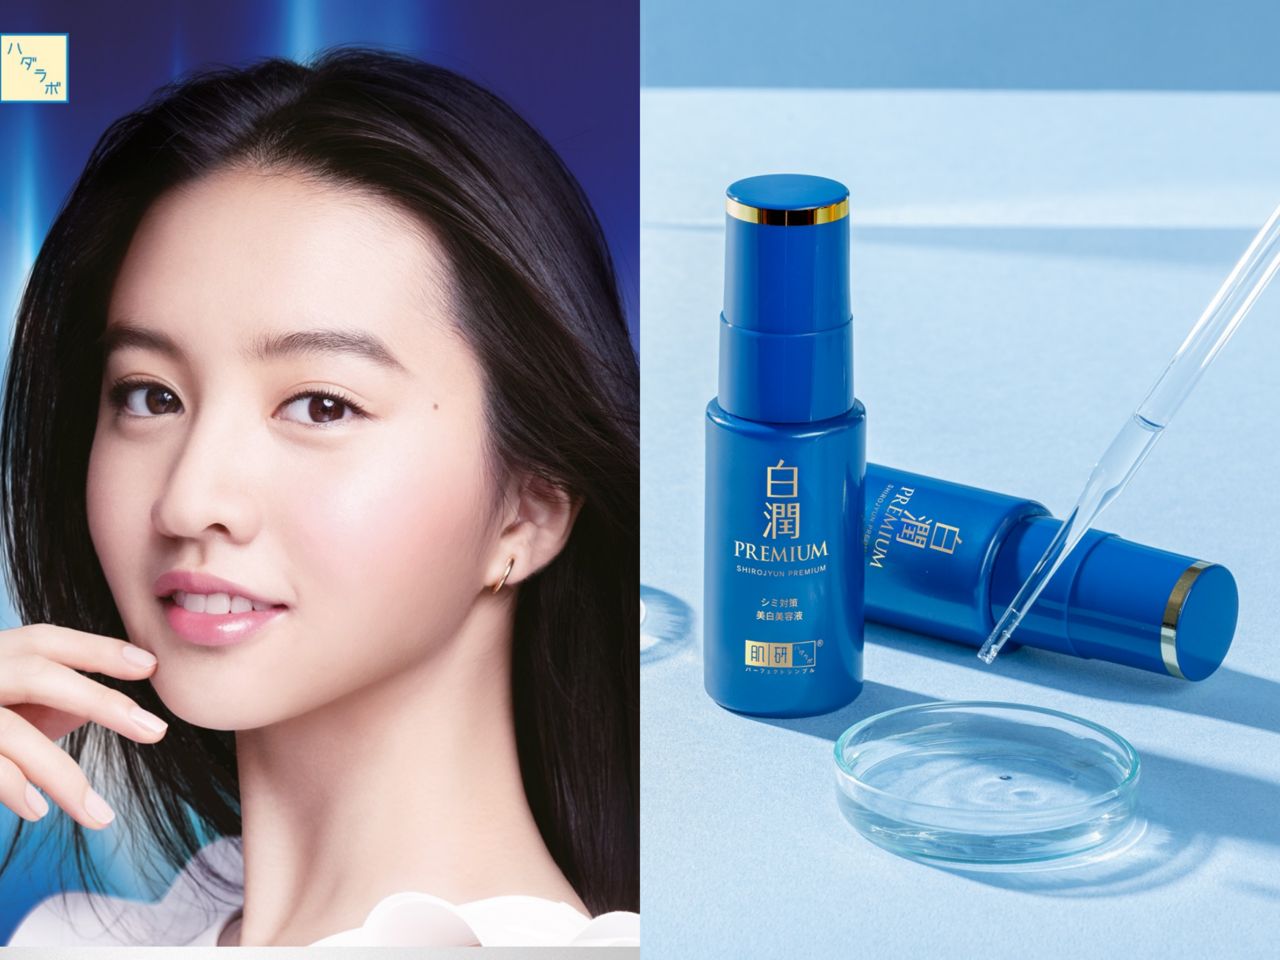 ▲FANCL,王綺嫻,LA PRAIRIE,ALBION,蘭芝,肌研。（圖／for_everyoung10 IG、品牌提供）